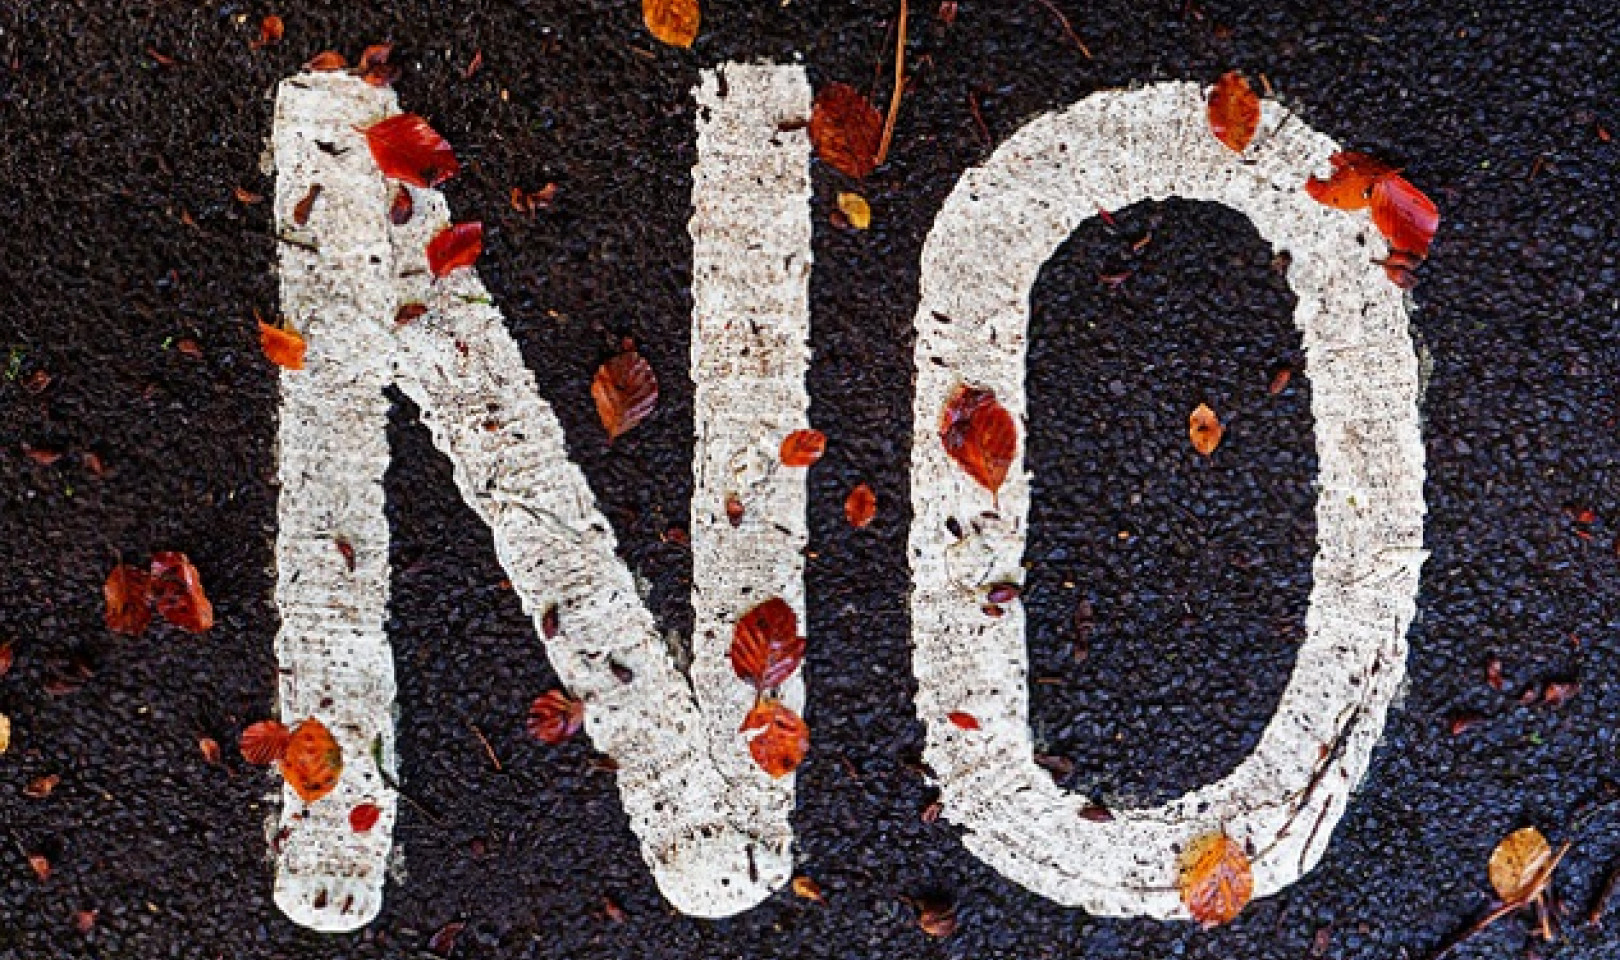 Are Our Fears of Saying ‘No’ Overblown?